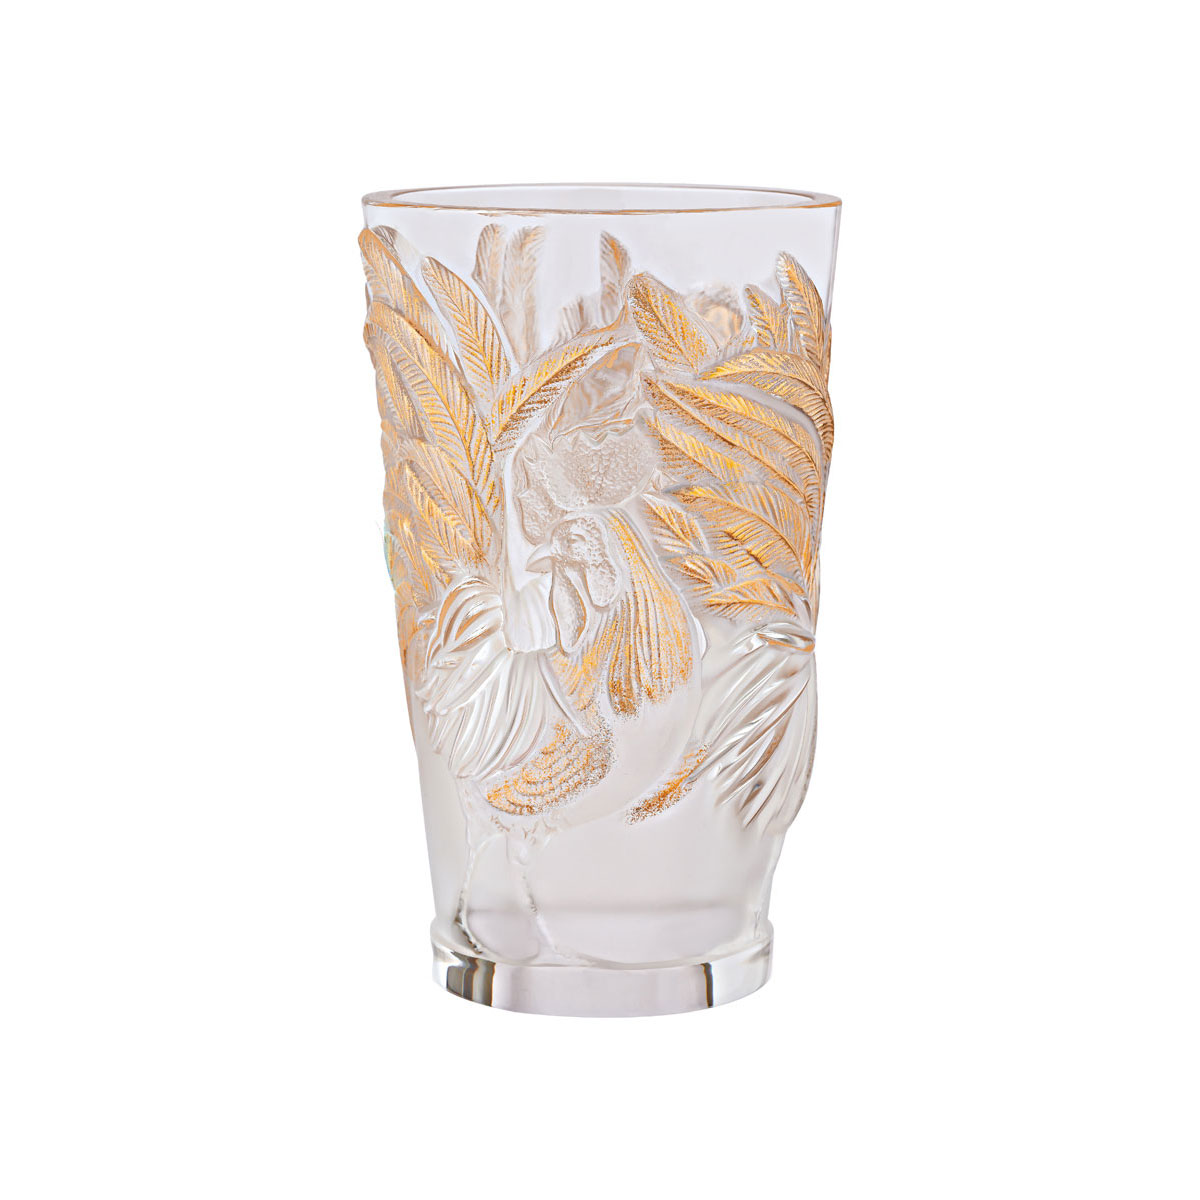 Lalique Zodiac Rooster Crystal Vase, Clear And Gold Stamped, Limited Edition Of 888 Pieces